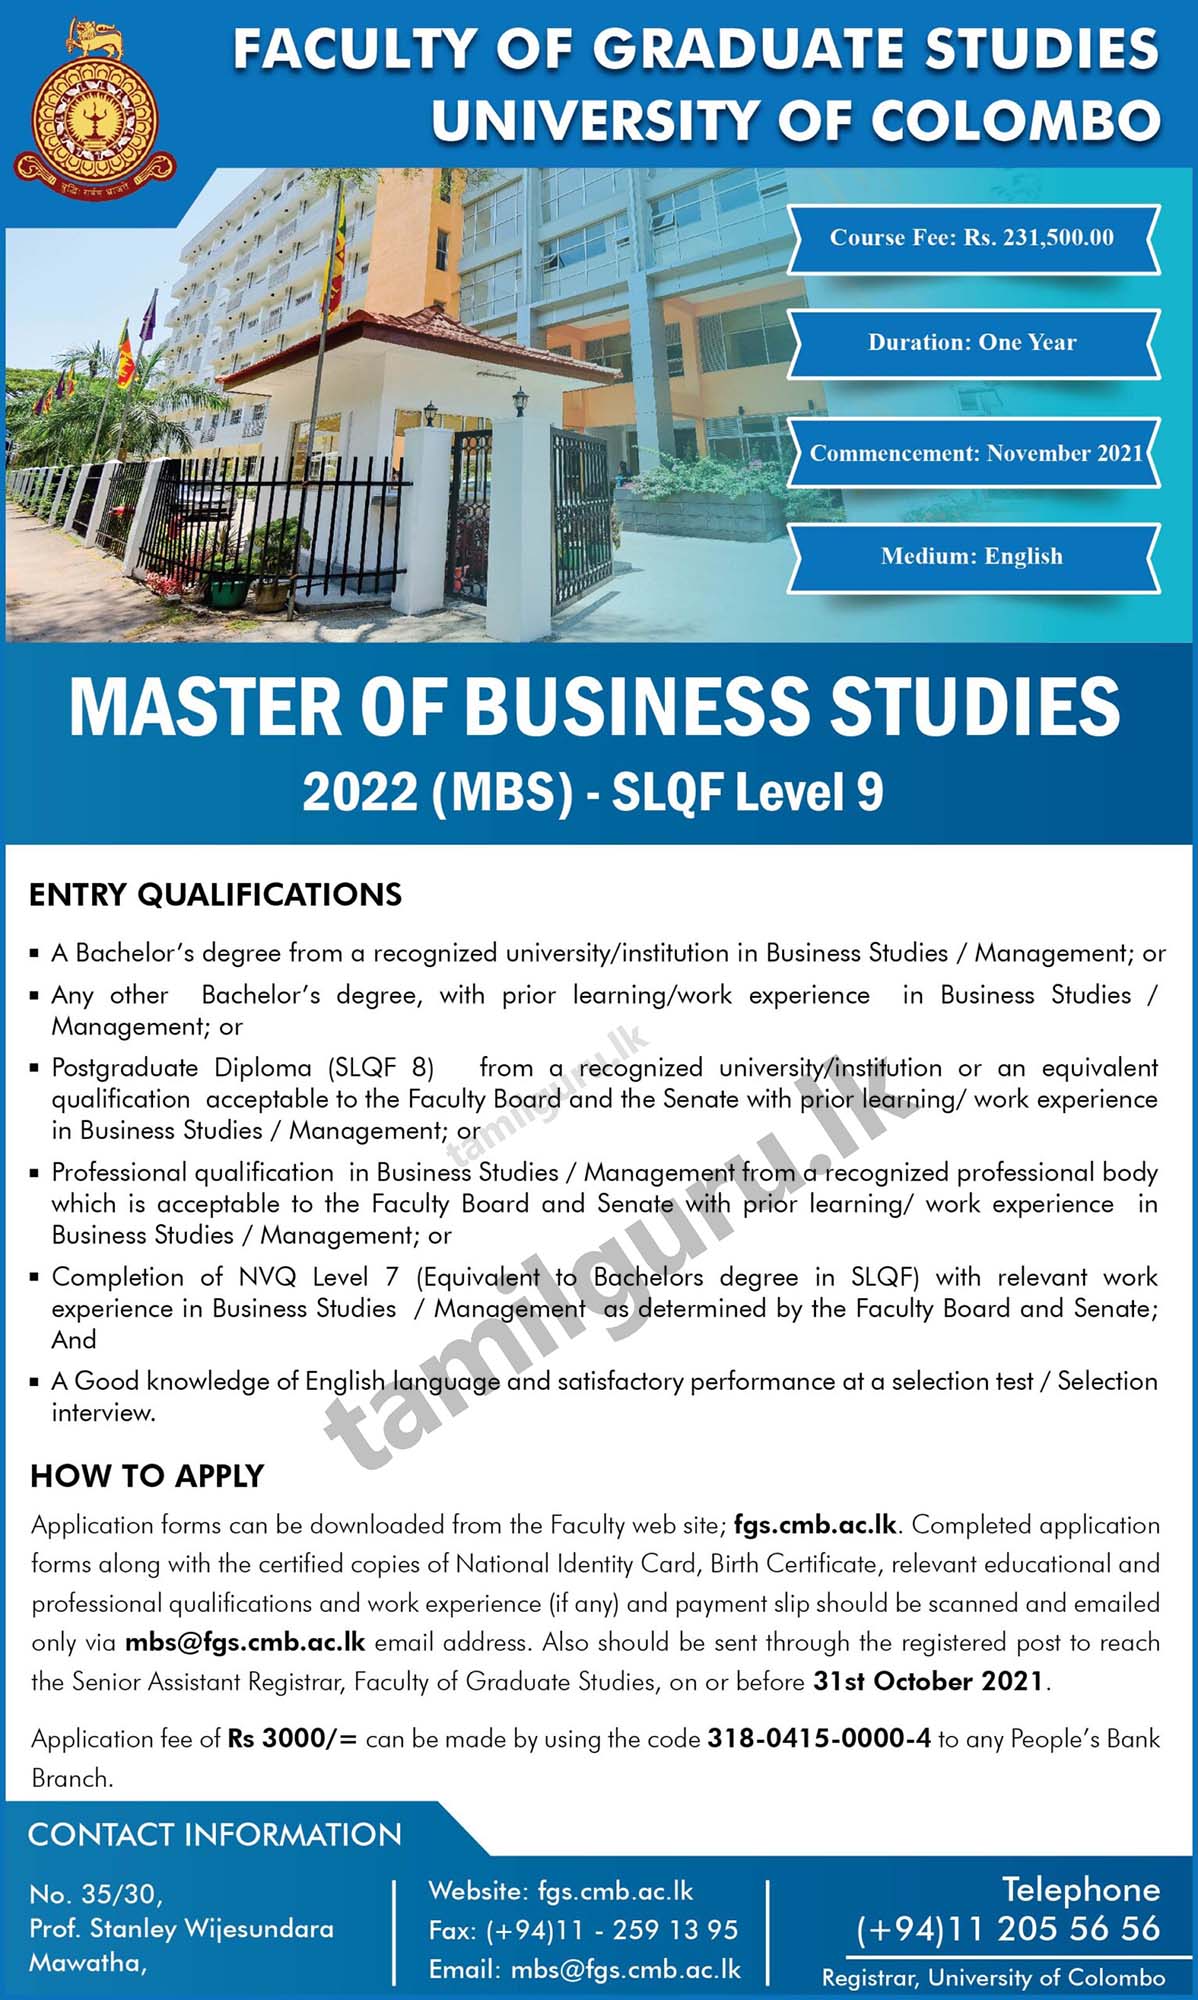 Master of Business Studies (MBS) 2022  - University of Colombo